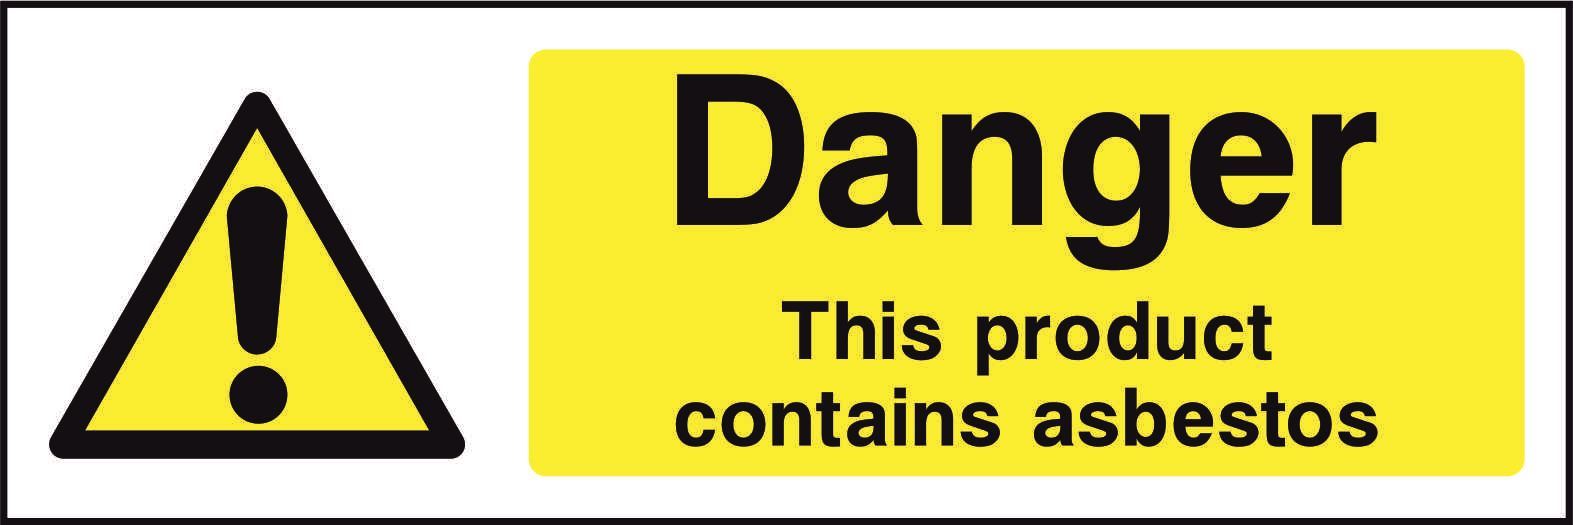 Danger This product contains asbestos